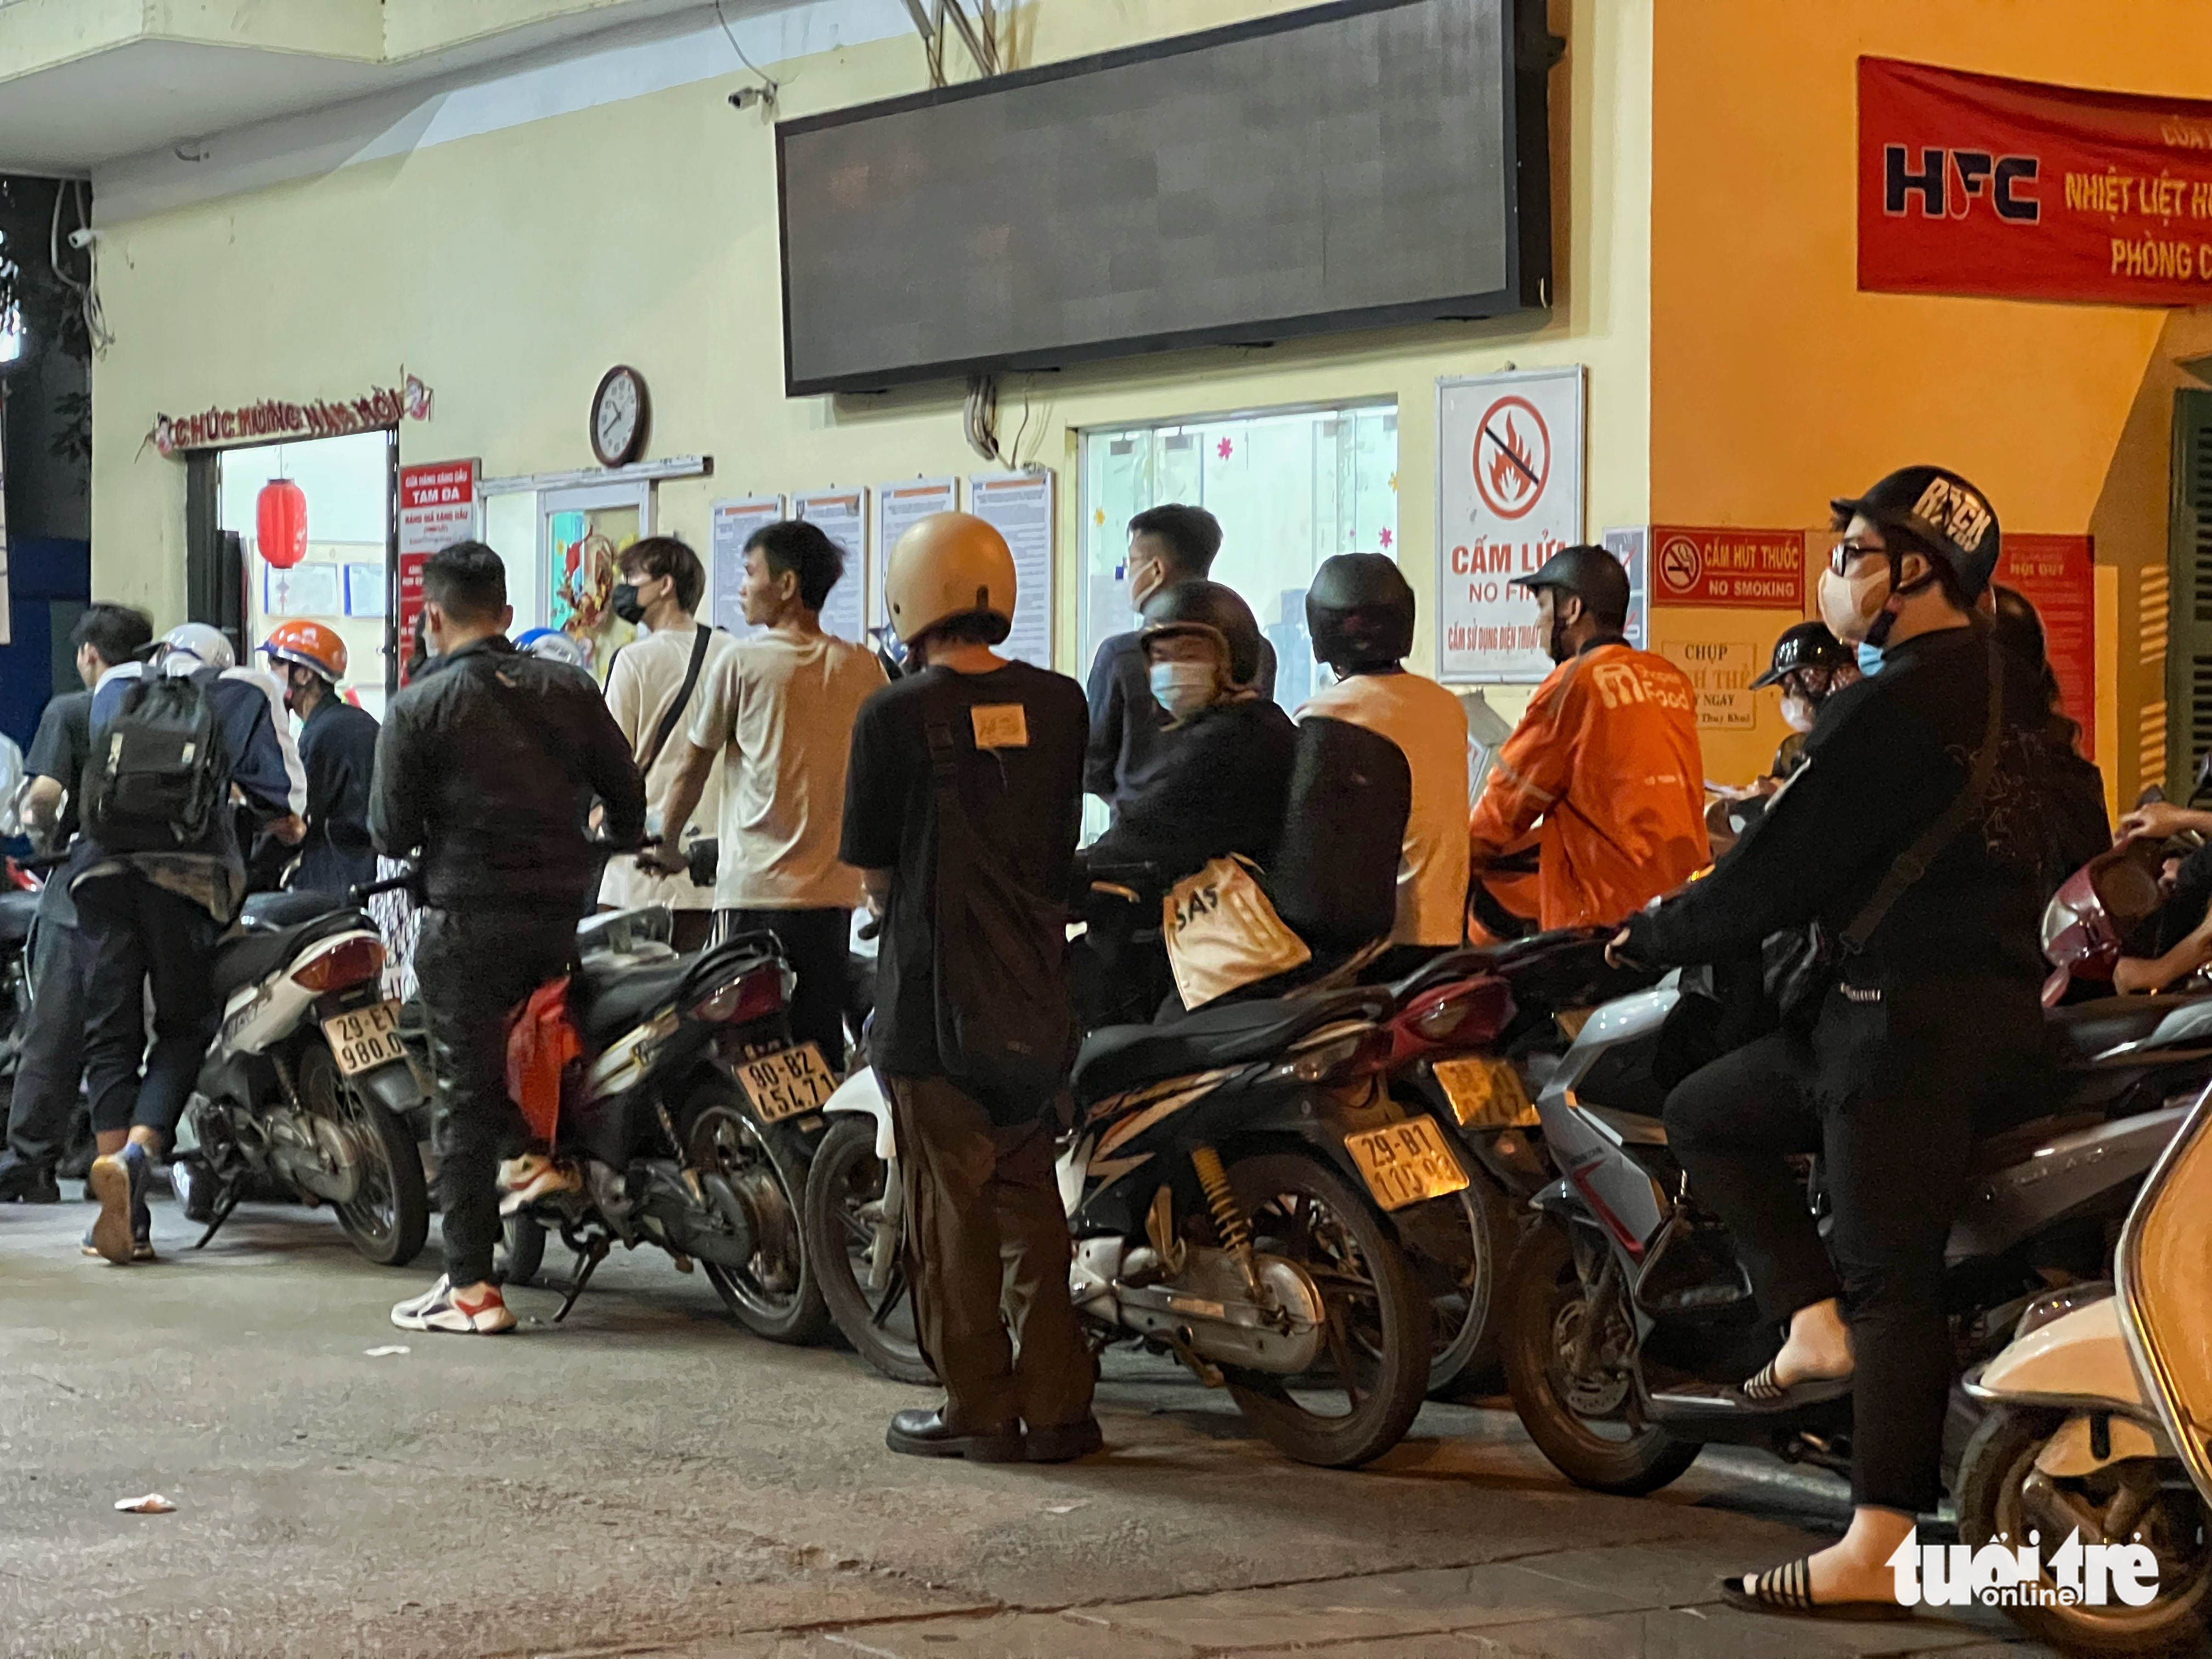 Motorcyclists line up at a filling station in Hanoi, November 11, 2022. Photo: Pham Tuan / Tuoi Tre